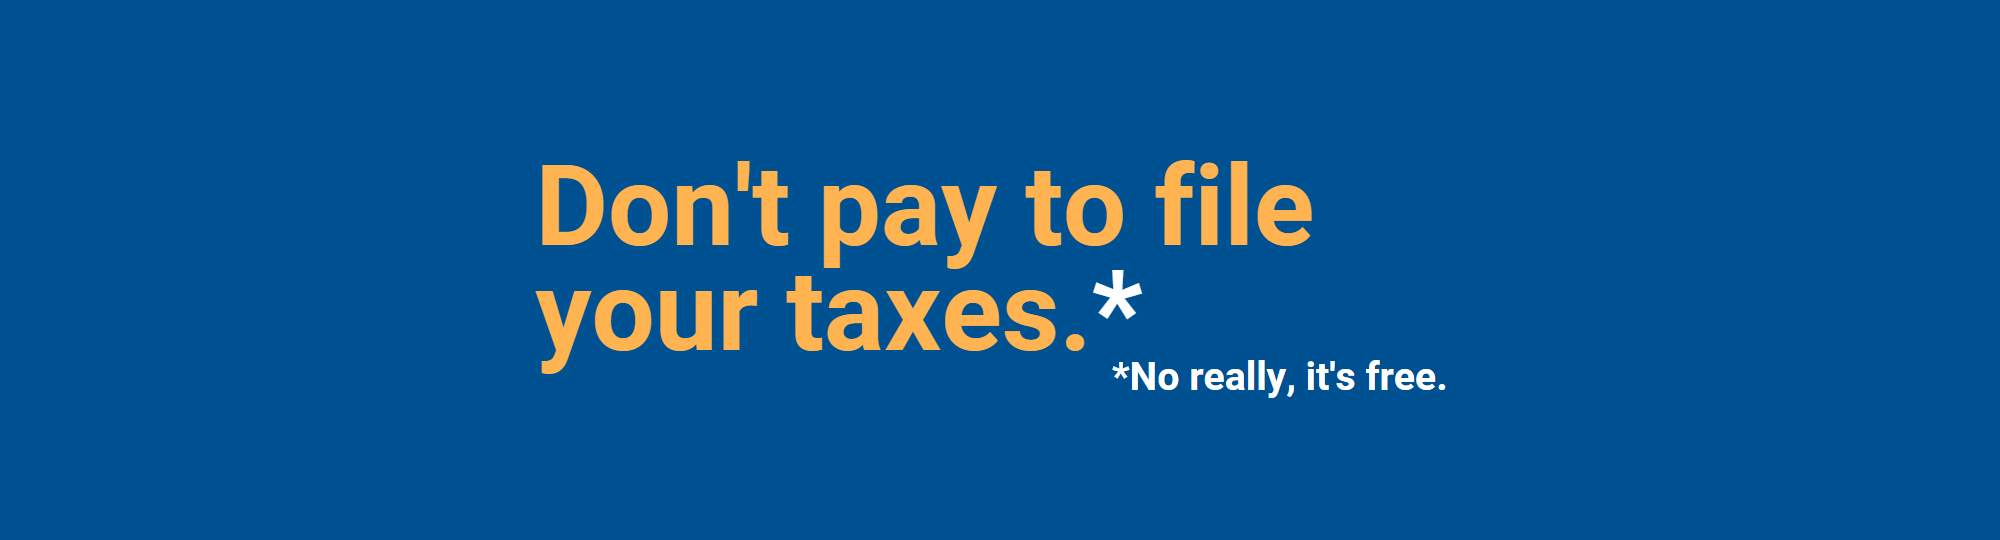 Don't pay to file your taxes.